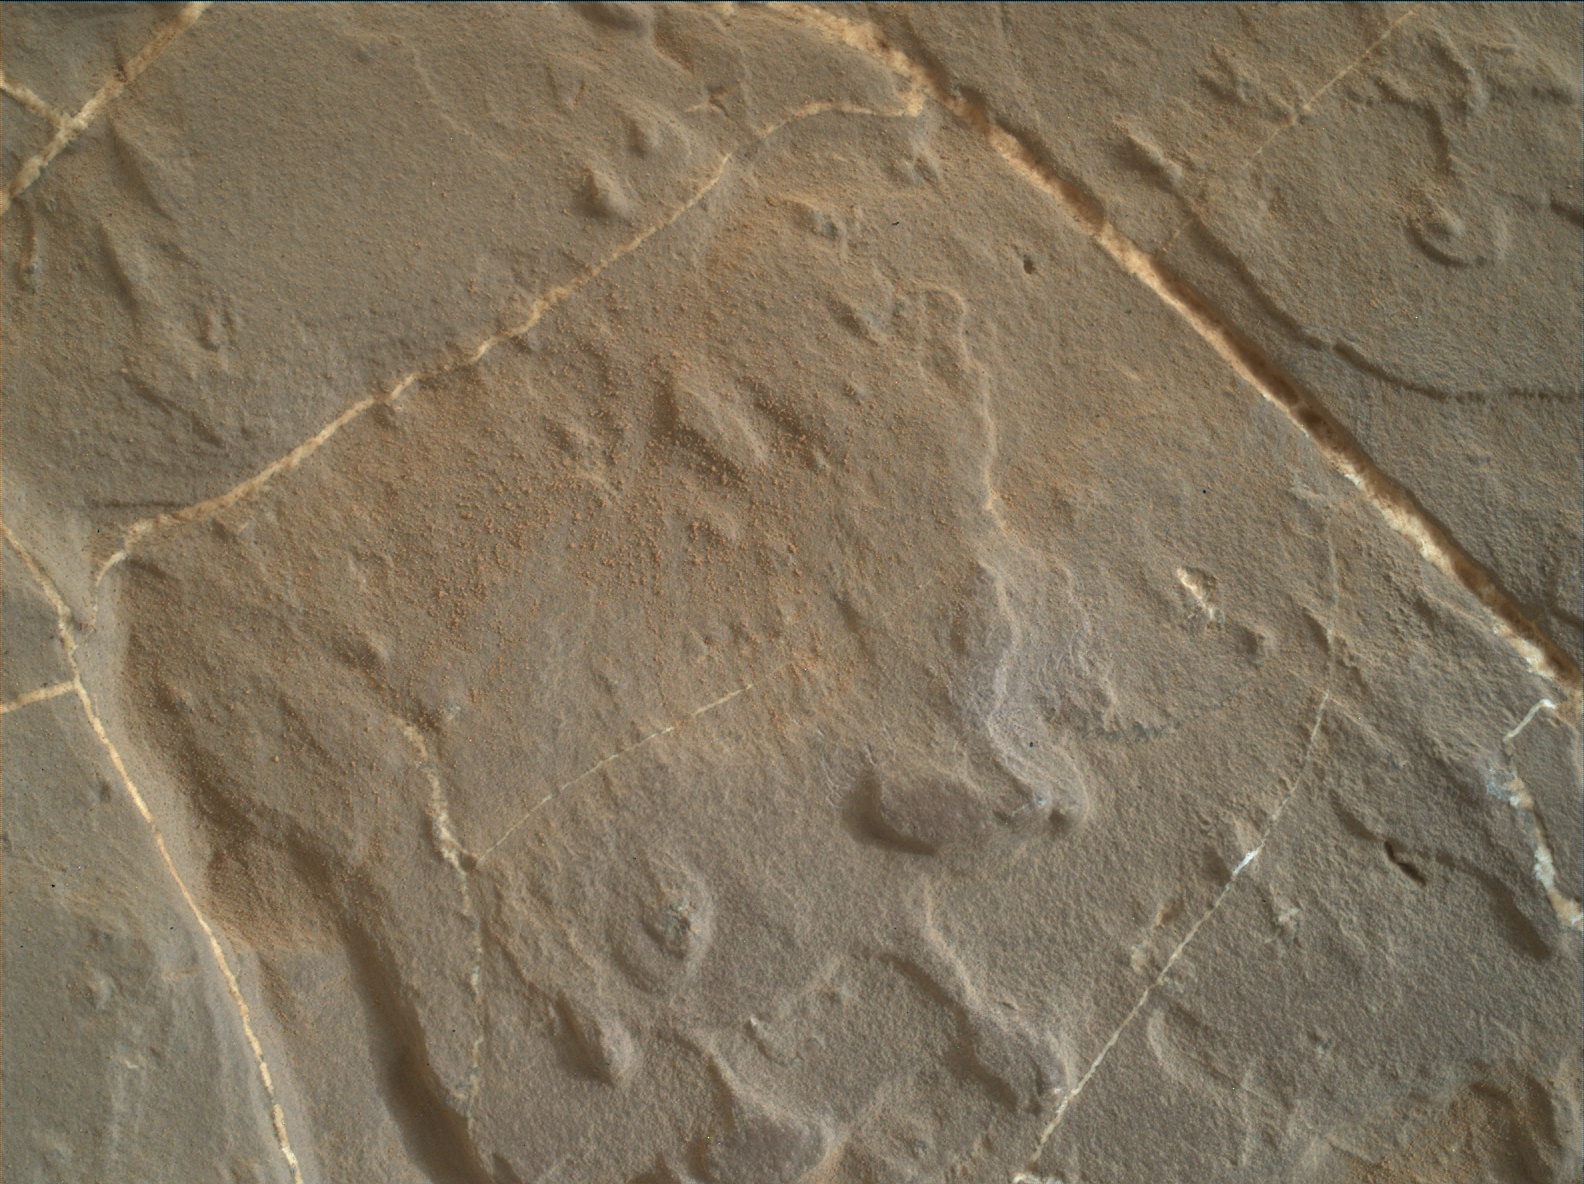 Nasa's Mars rover Curiosity acquired this image using its Mars Hand Lens Imager (MAHLI) on Sol 1927